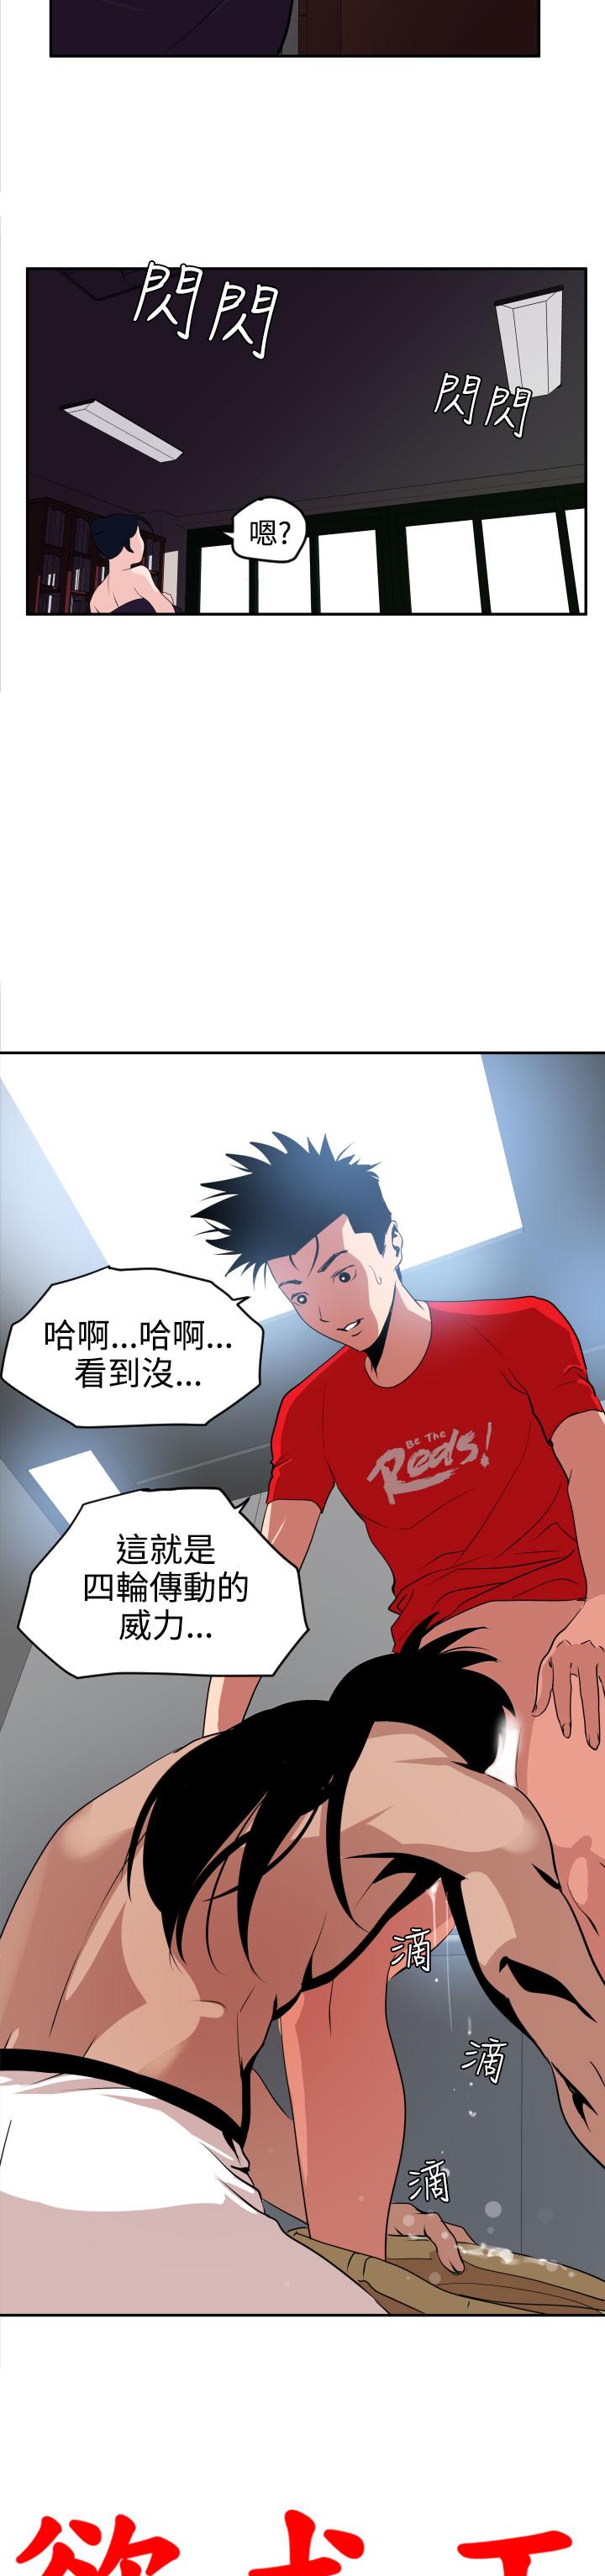 Desire King (慾求王) Ch.1-16 (chinese) 433